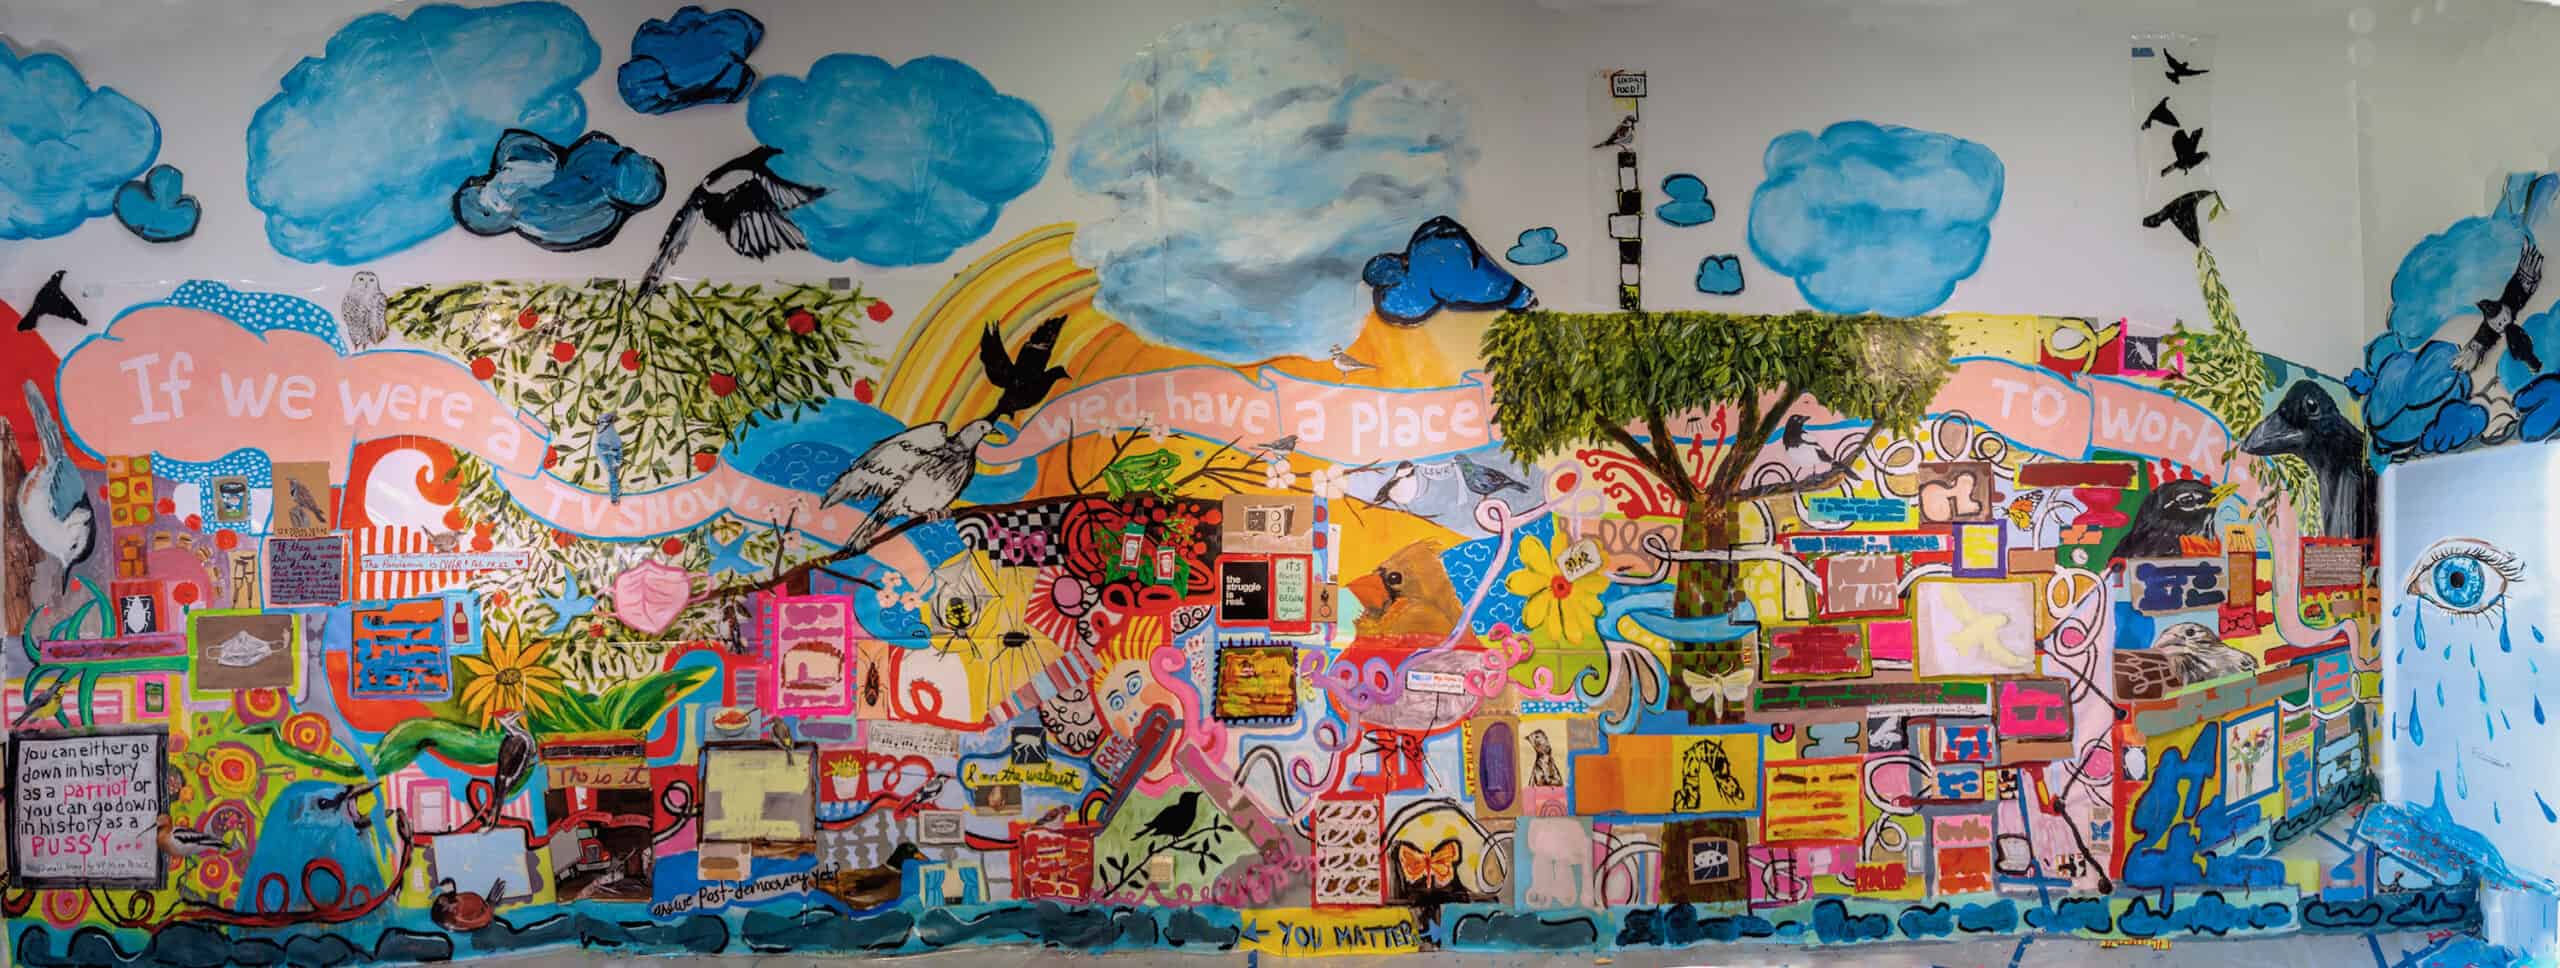 Mural: If we were a TV show, we'd have a place to work, acrylic on plastic. (photo by John Penner)